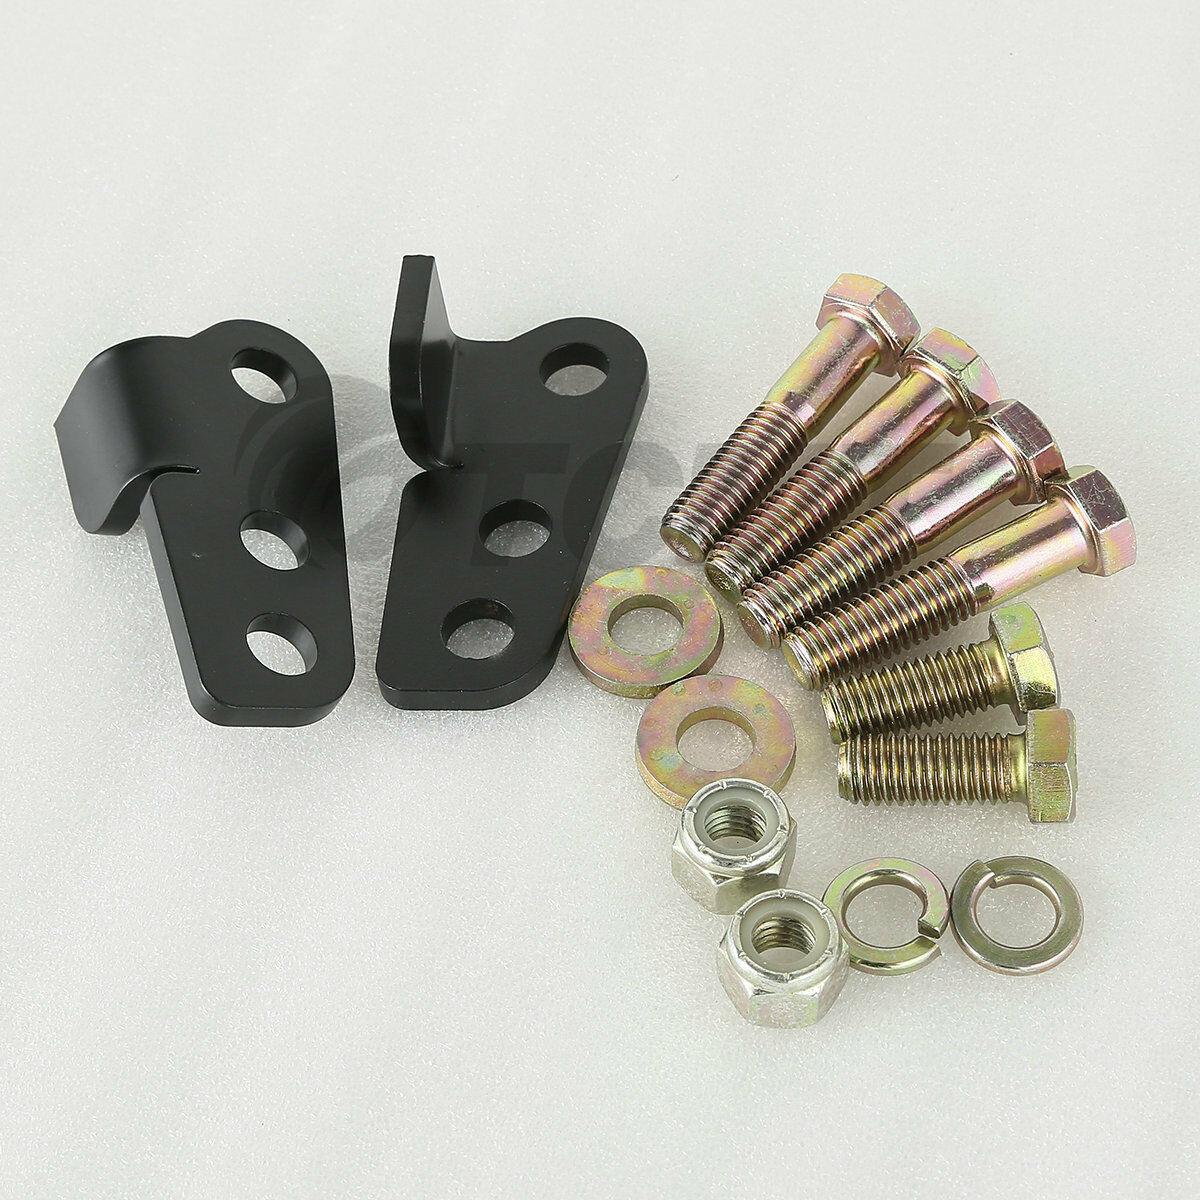 Adjustable 1"- 2" Rear Lowering Kit For 02-16 Harley Touring Street Glide FLHX - Moto Life Products